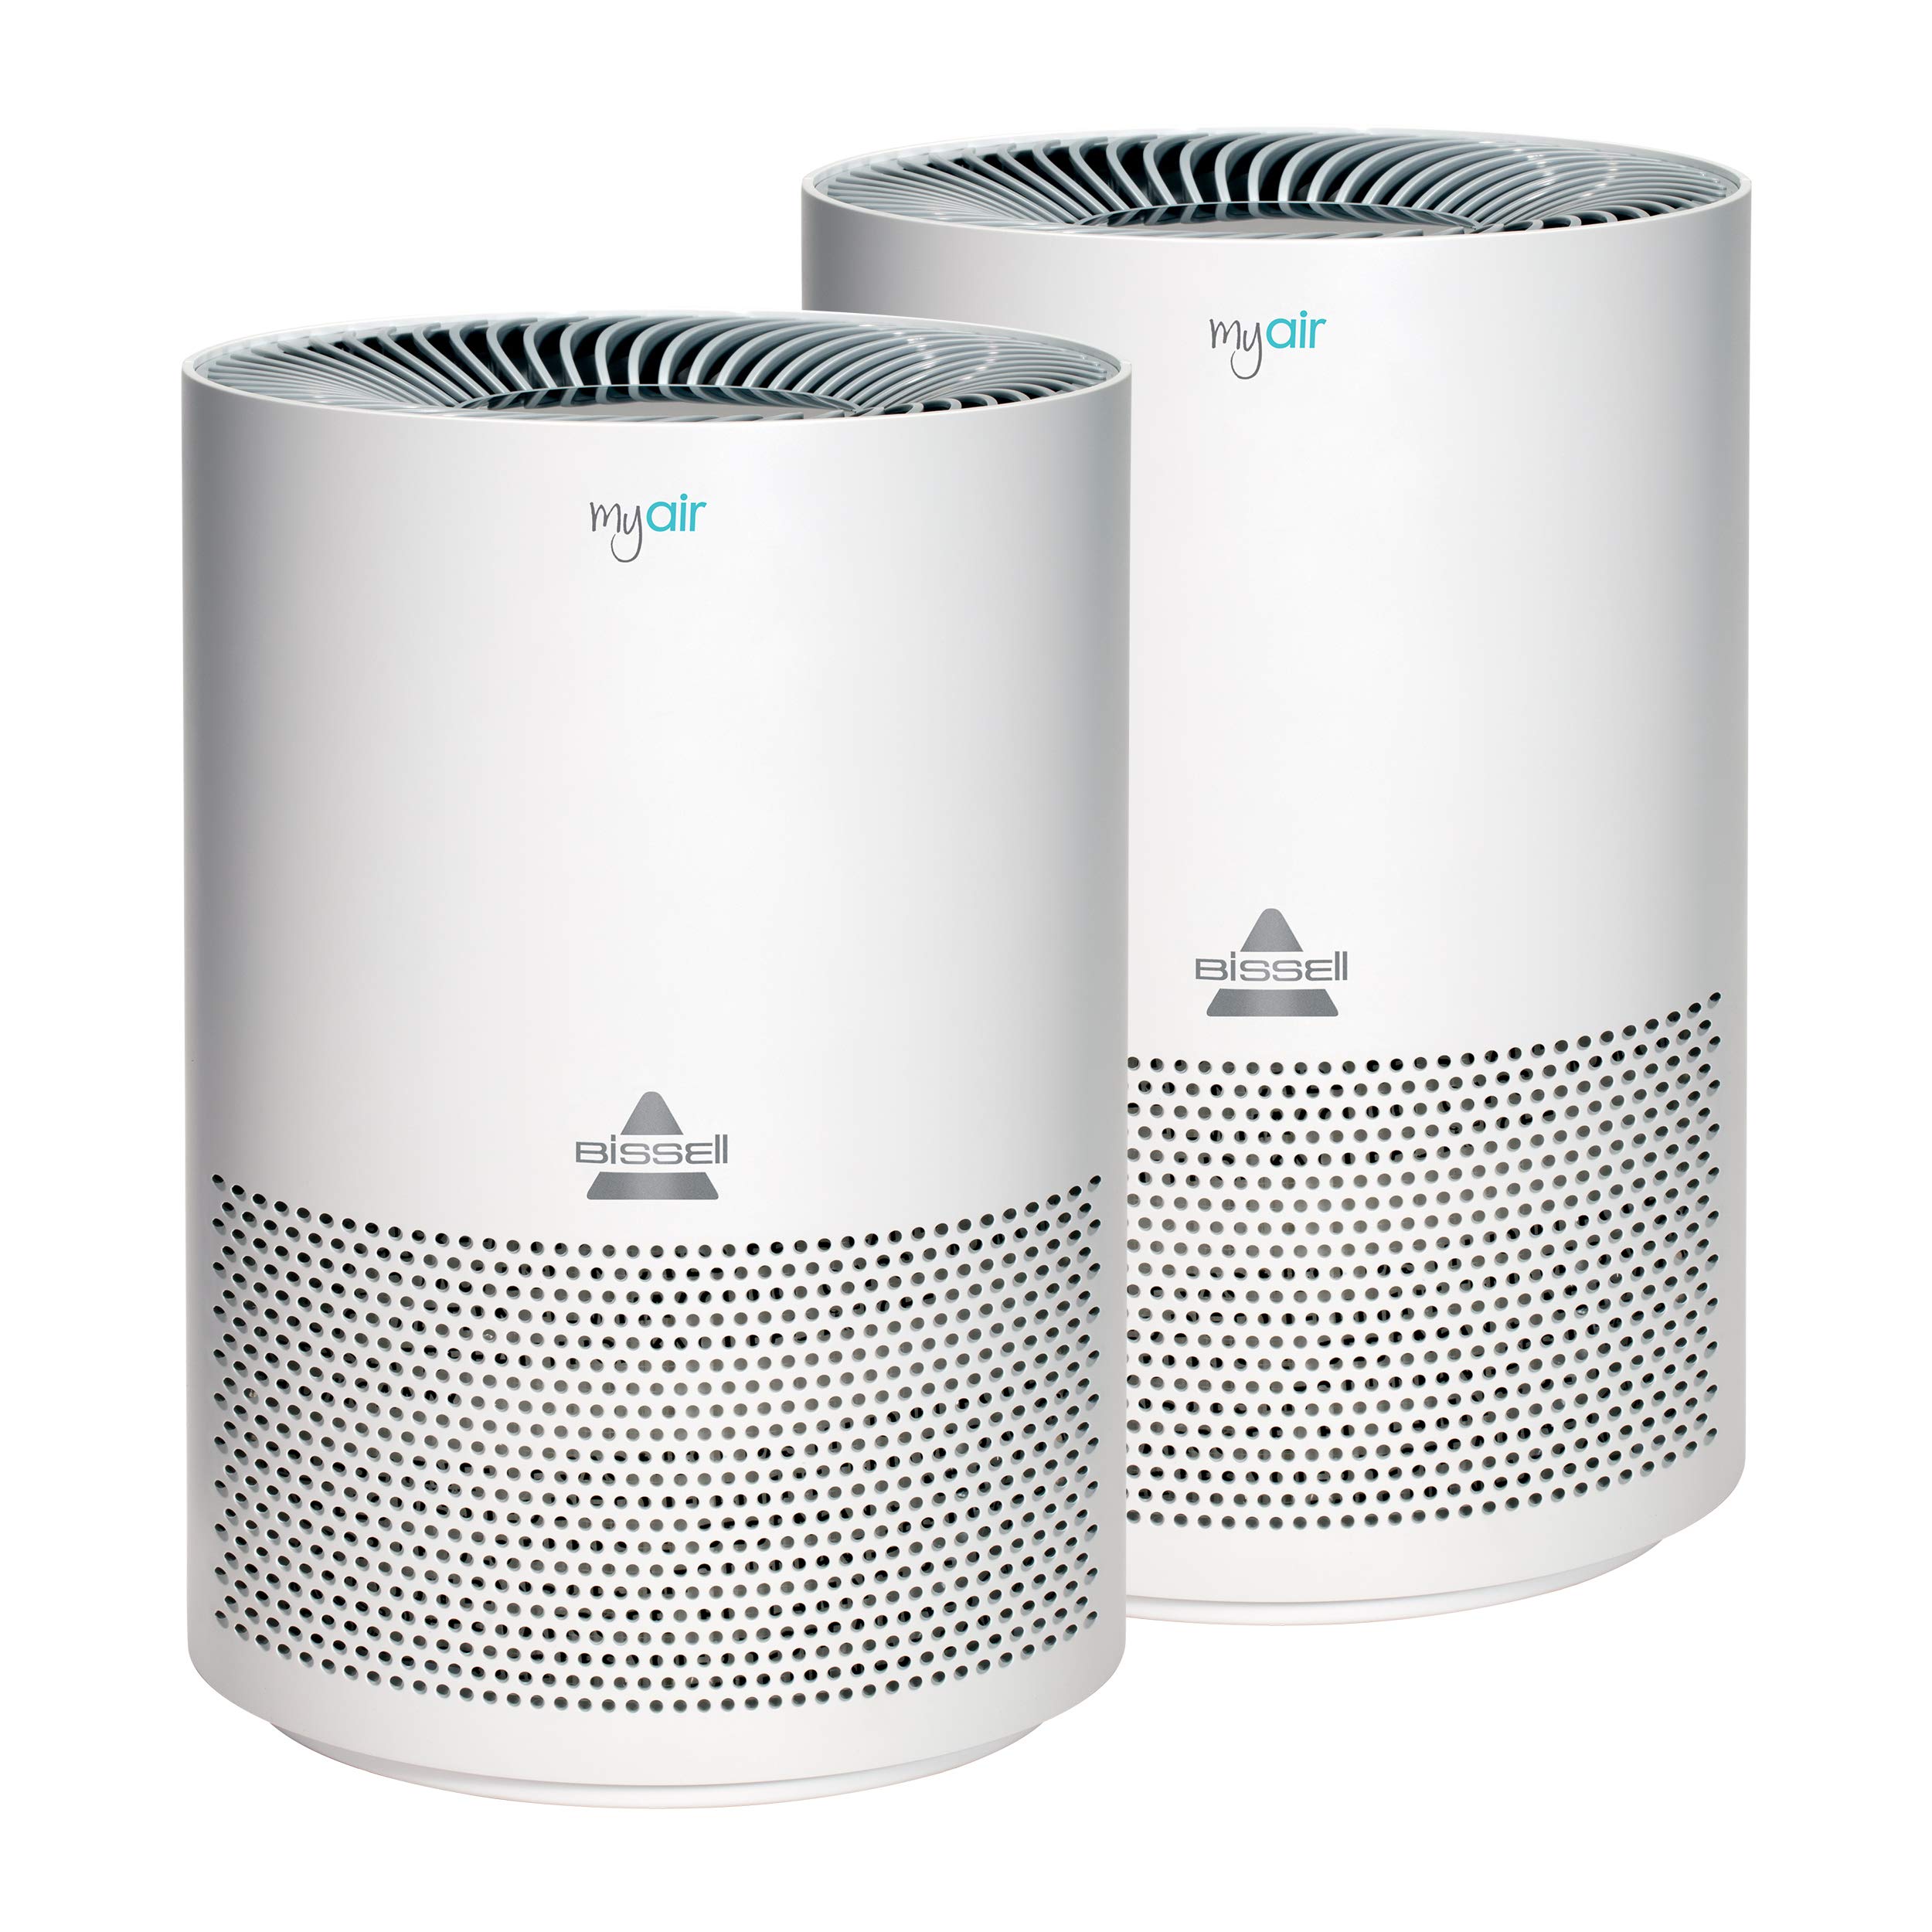 Bissell MYair, 2 Pack, Purifier with High Efficiency and Carbon Filter for Small Room and Home, Quiet Bedroom Air Cleaner for Allergies, Pets, Dust, Dander, Pollen, Smoke, Odors, 27809, Only $99.99